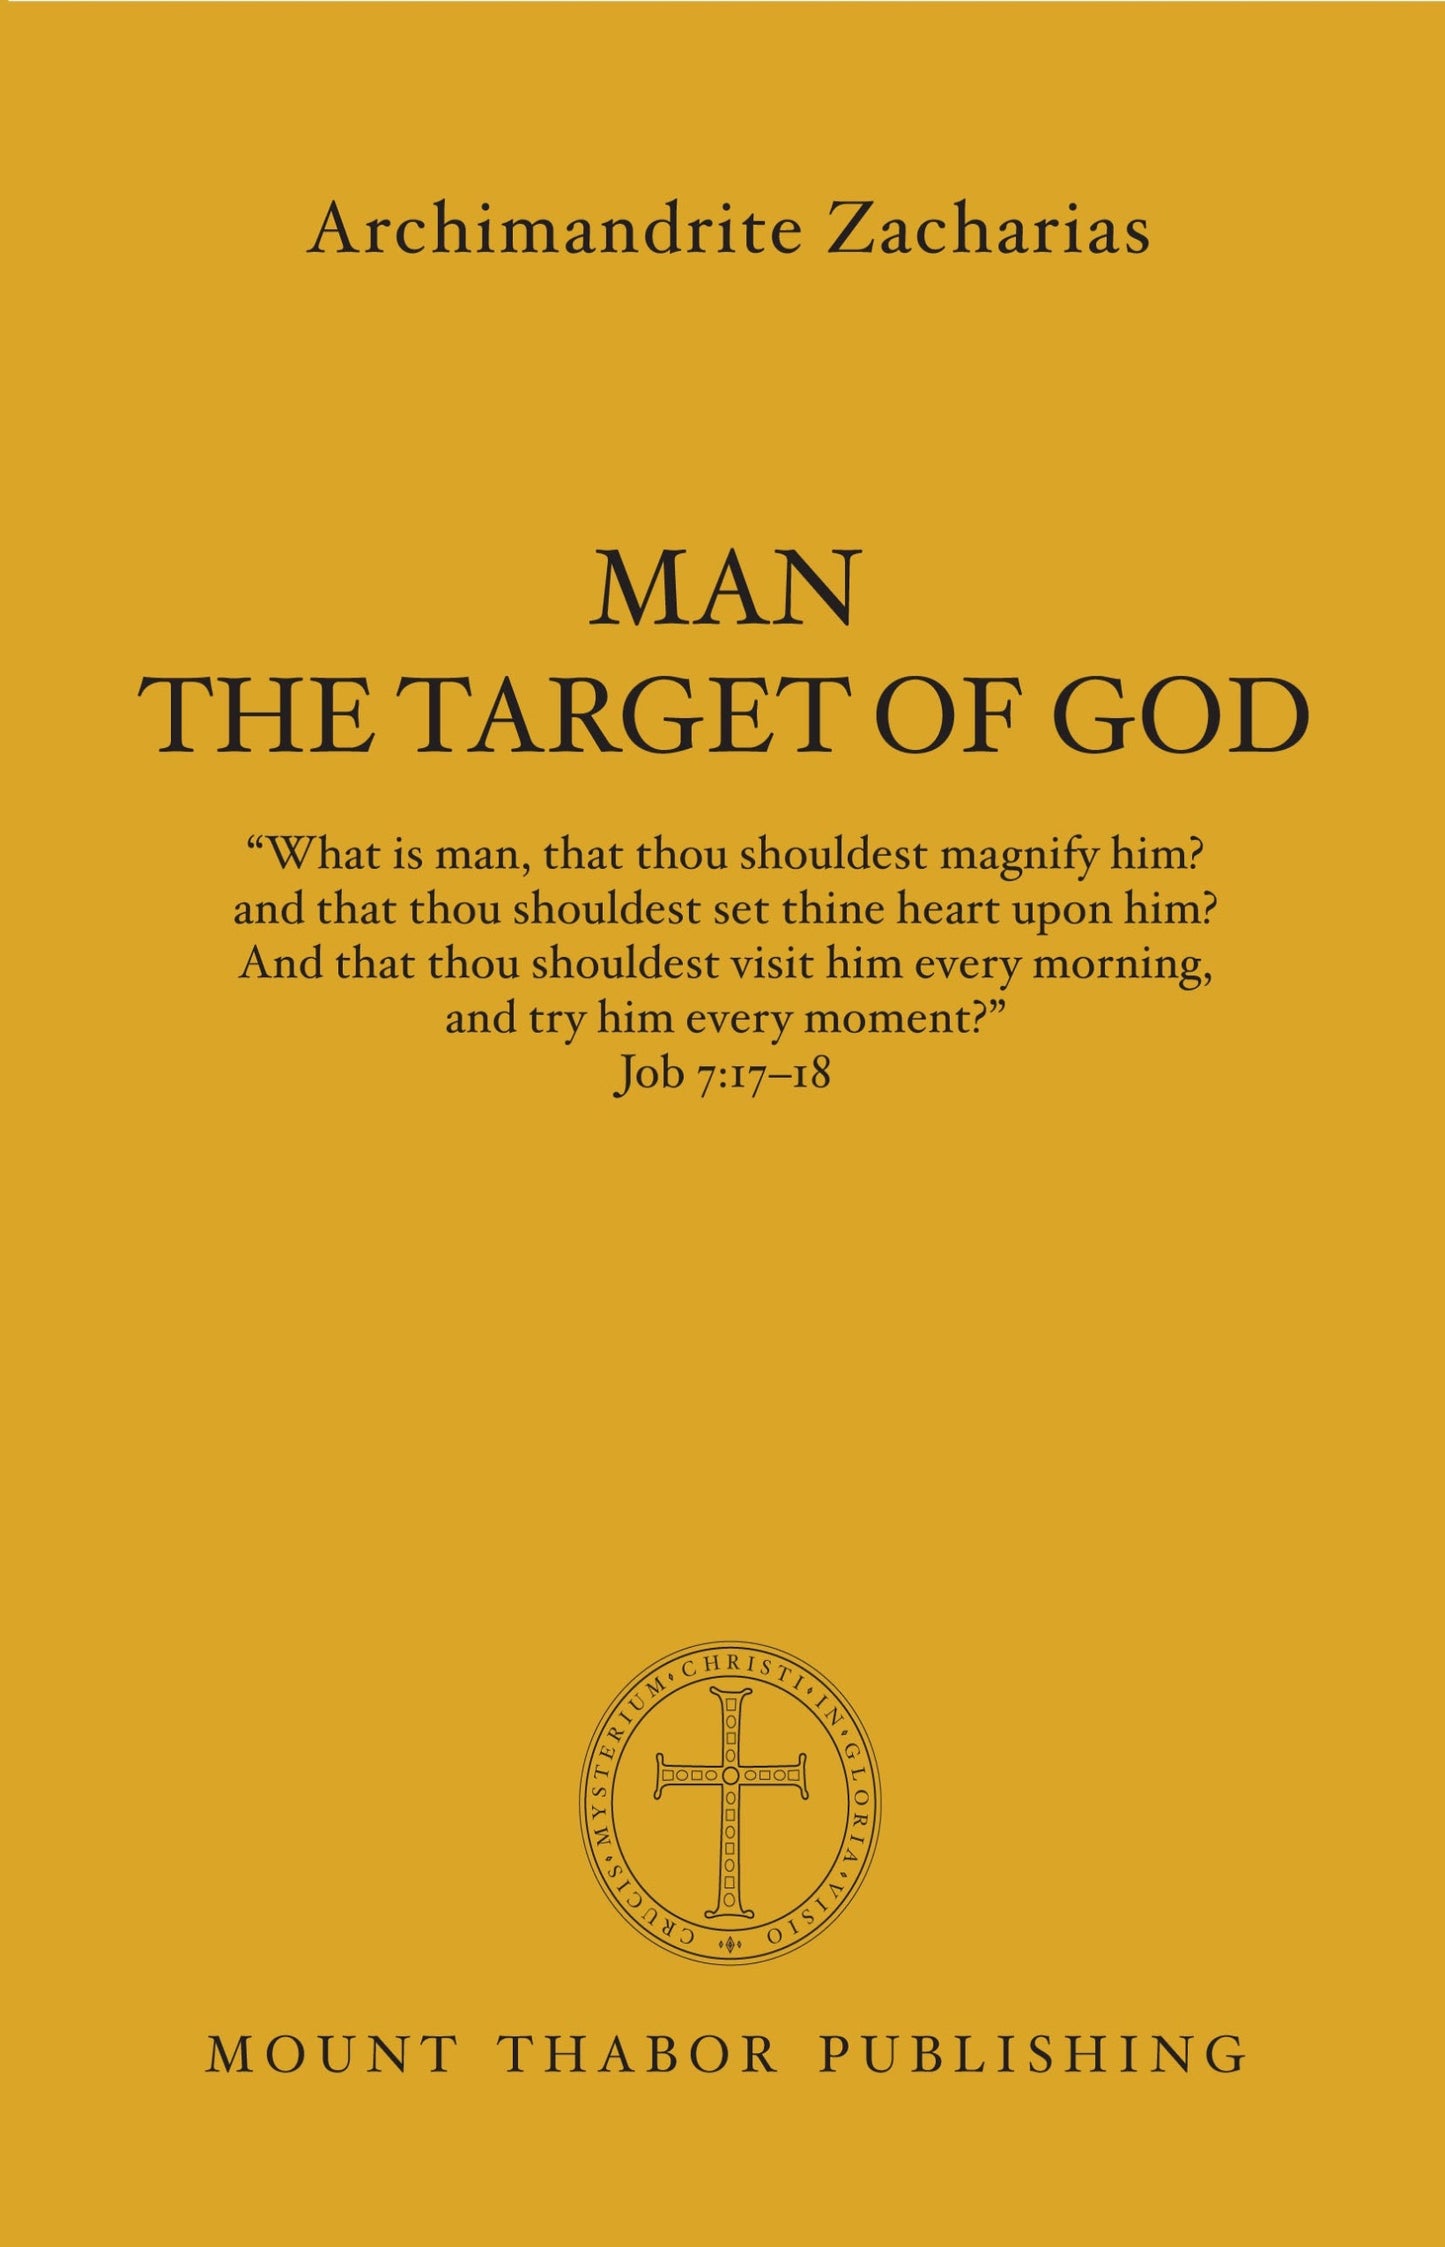 Front Cover of Man the Target of God by Archimandrite Zacharias